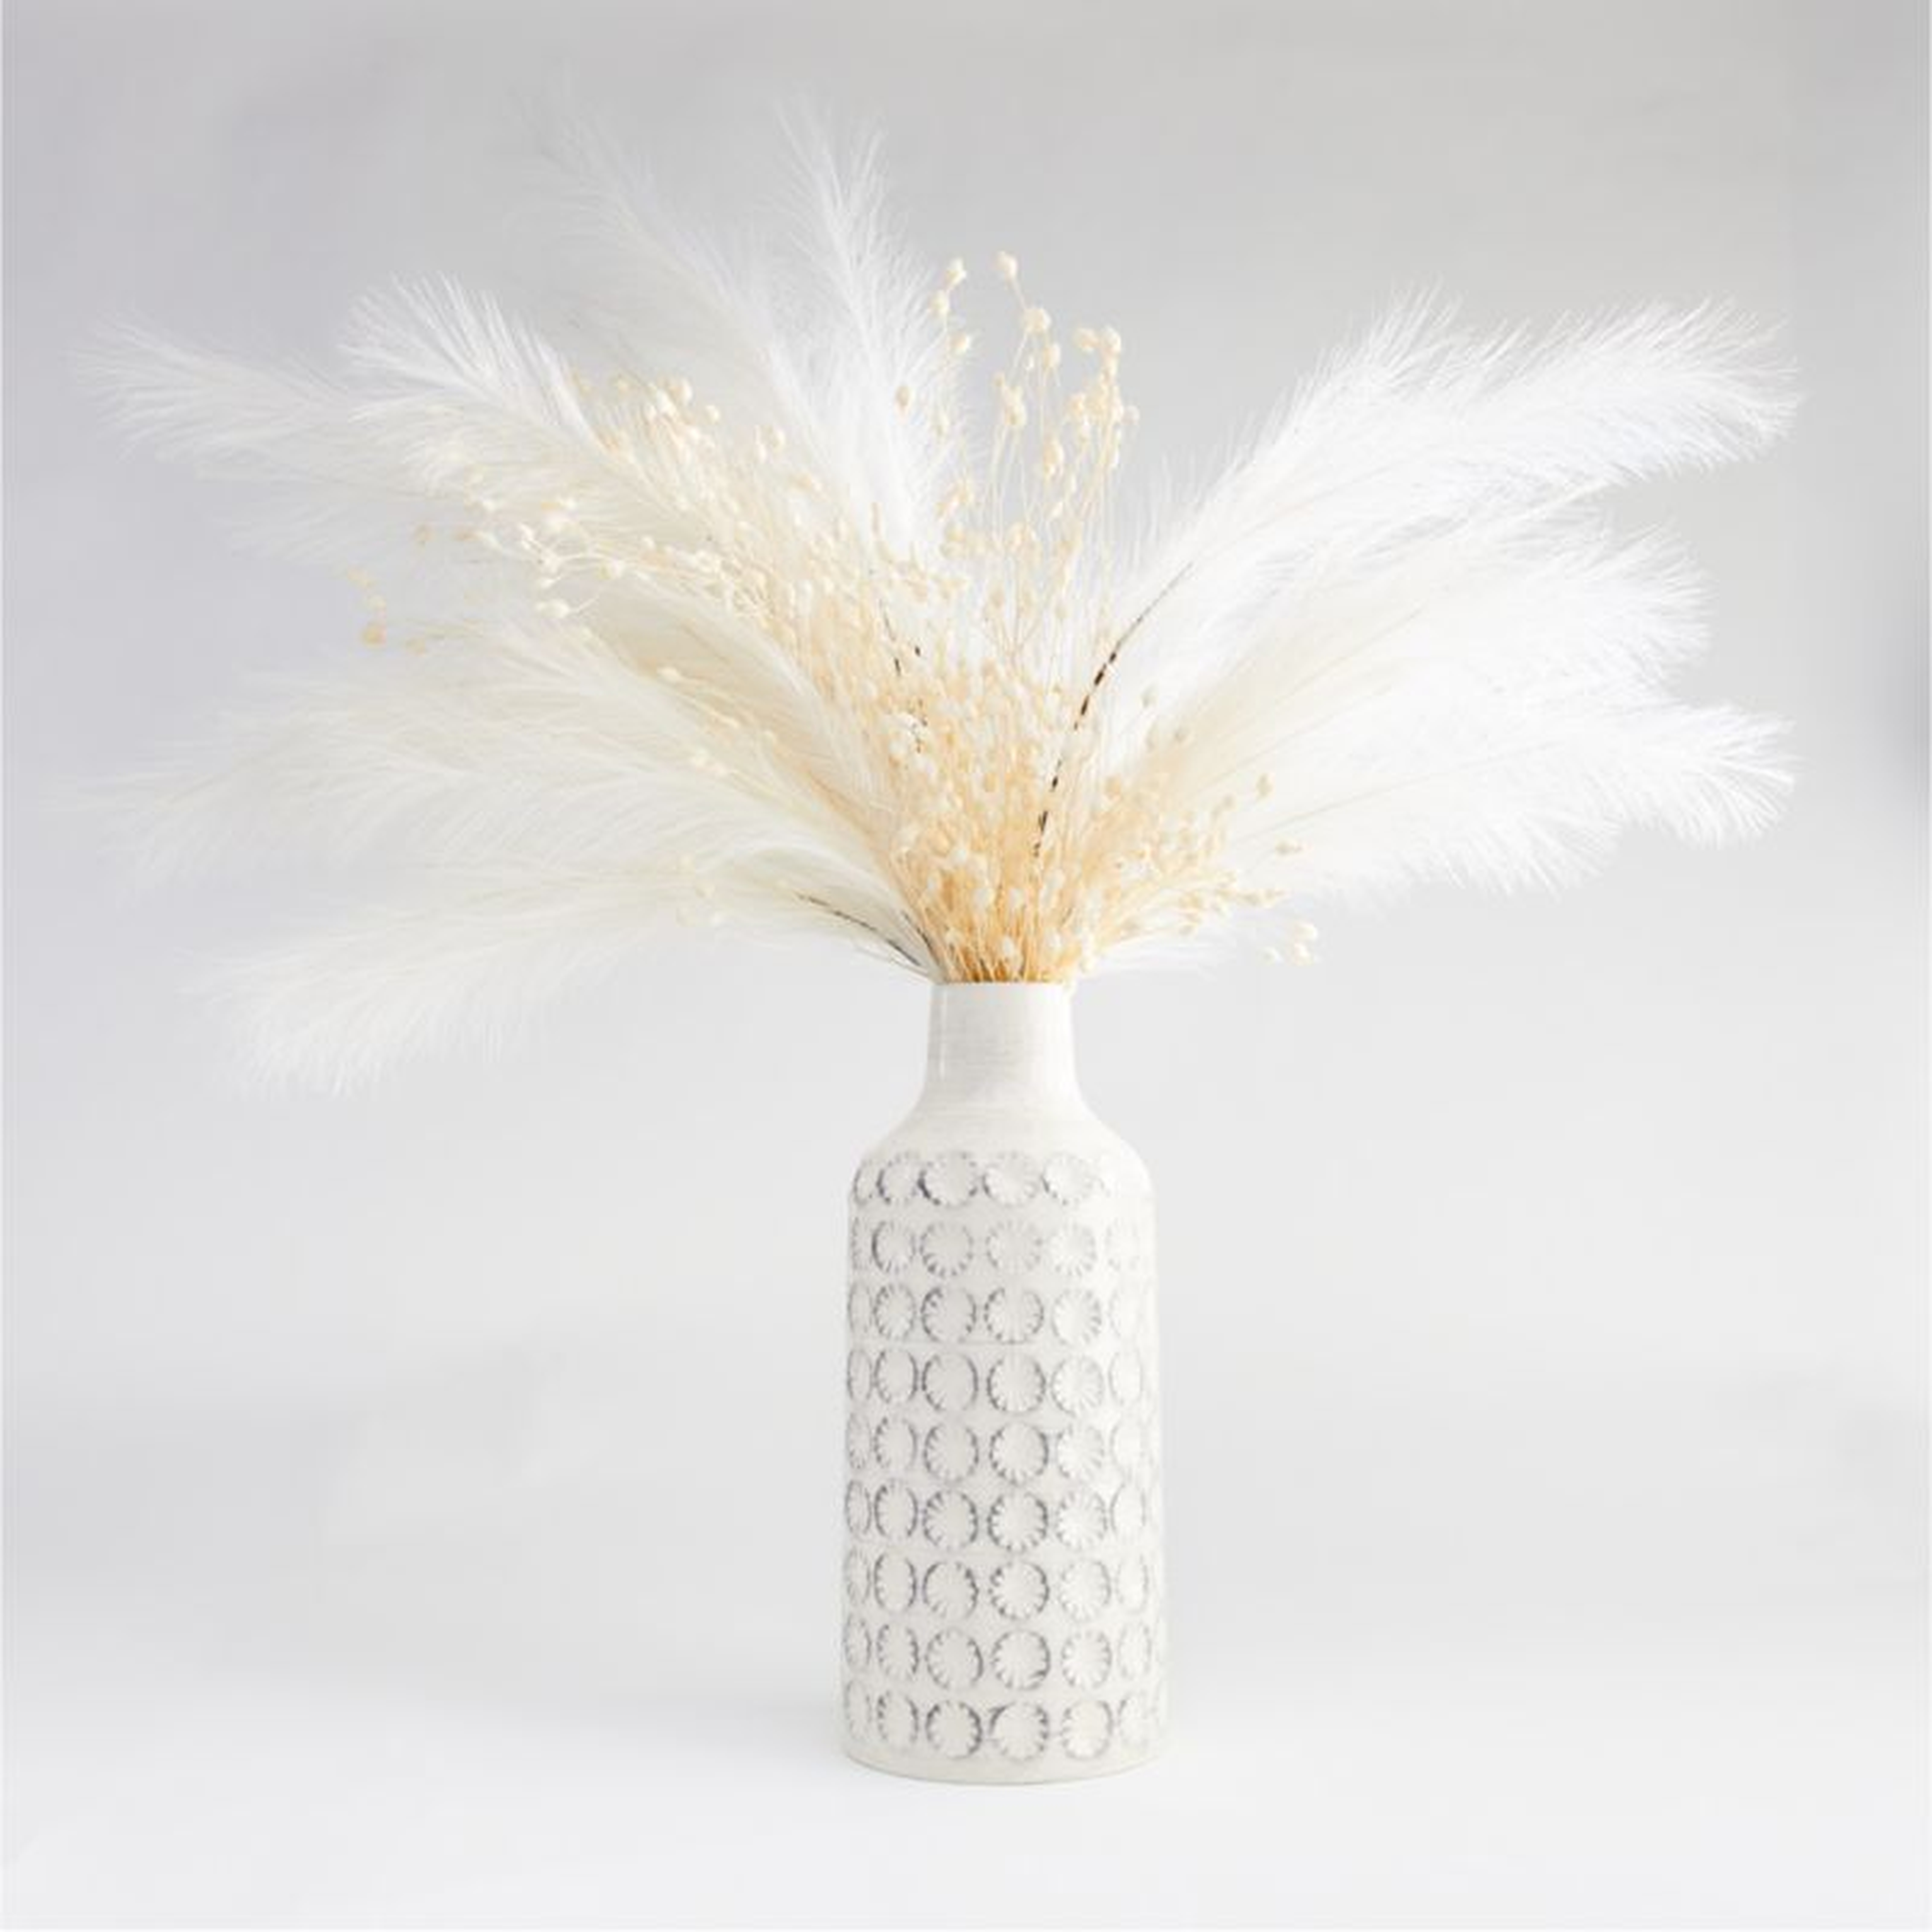 Pampas Grass Bunch - Crate and Barrel